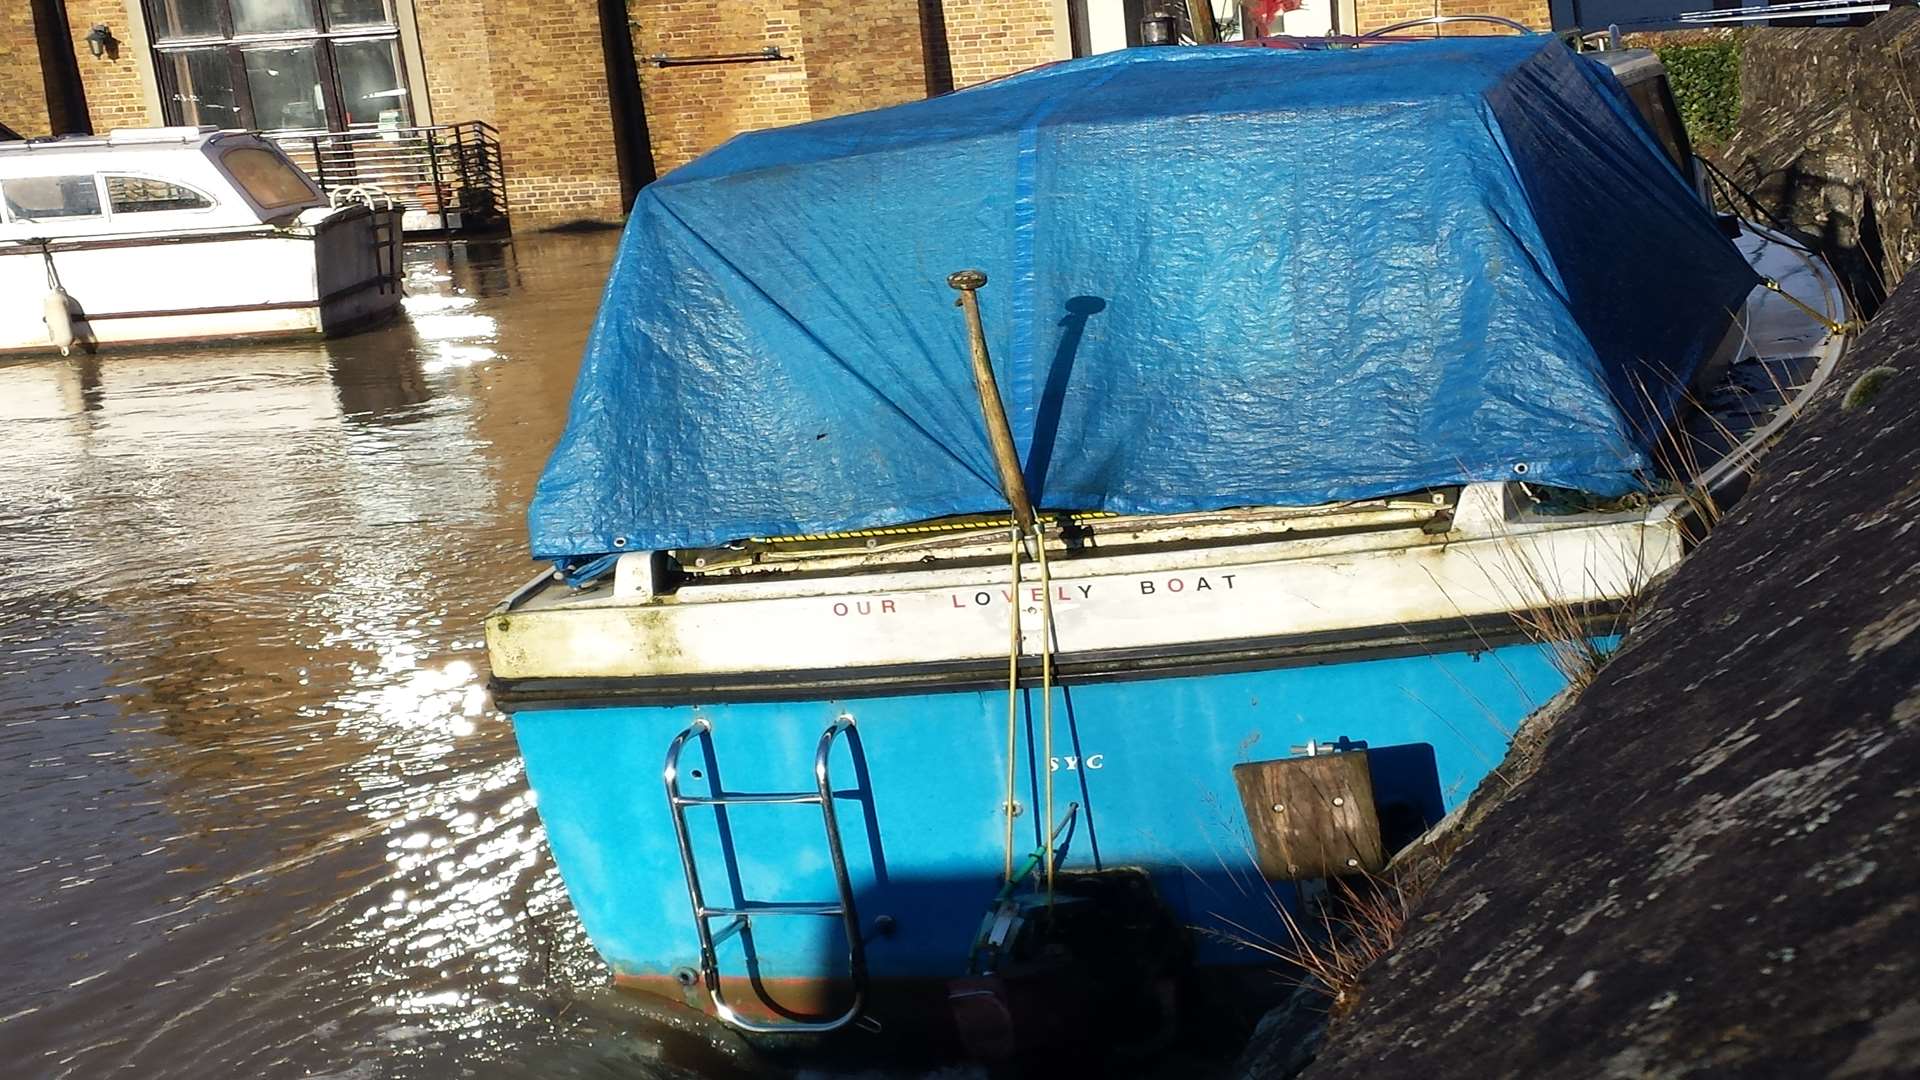 It's called Our Lovely Boat, but this beloved craft at East Farleigh was going nowhere. Picture: Natalie Spearman